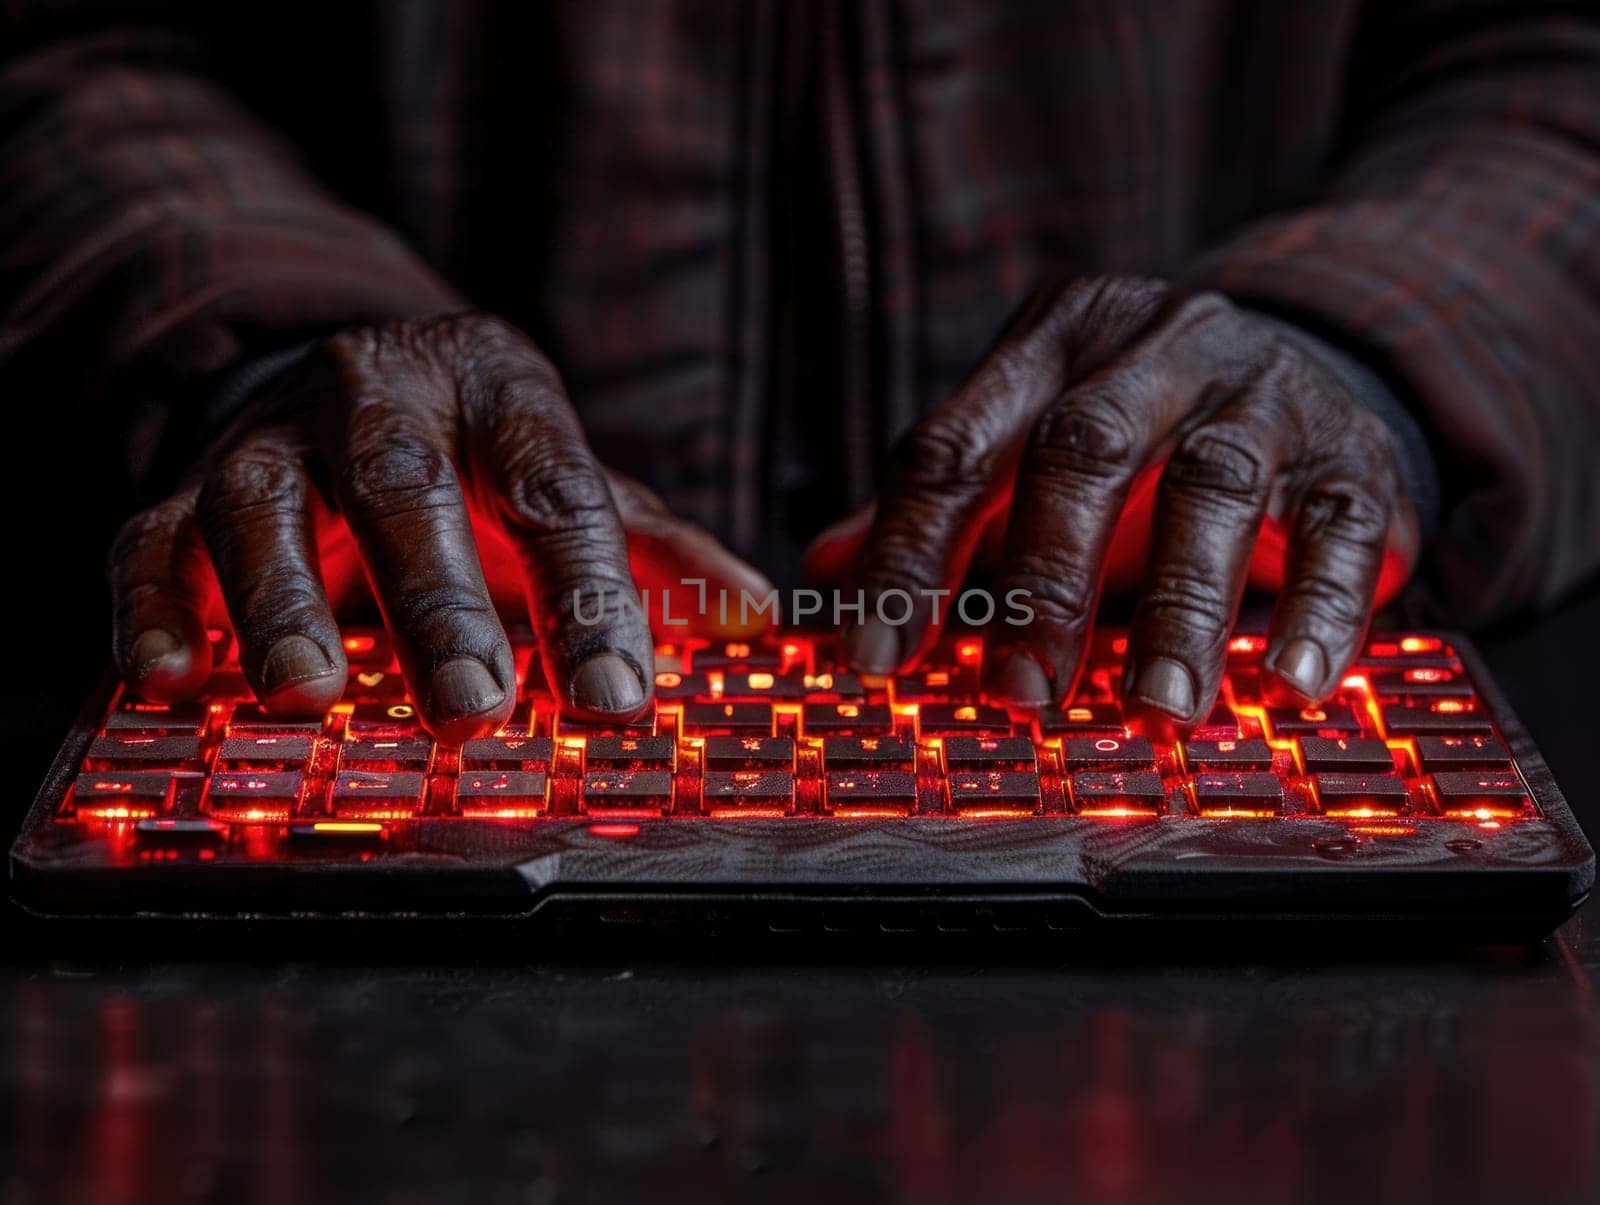 Person Typing on Keyboard by but_photo